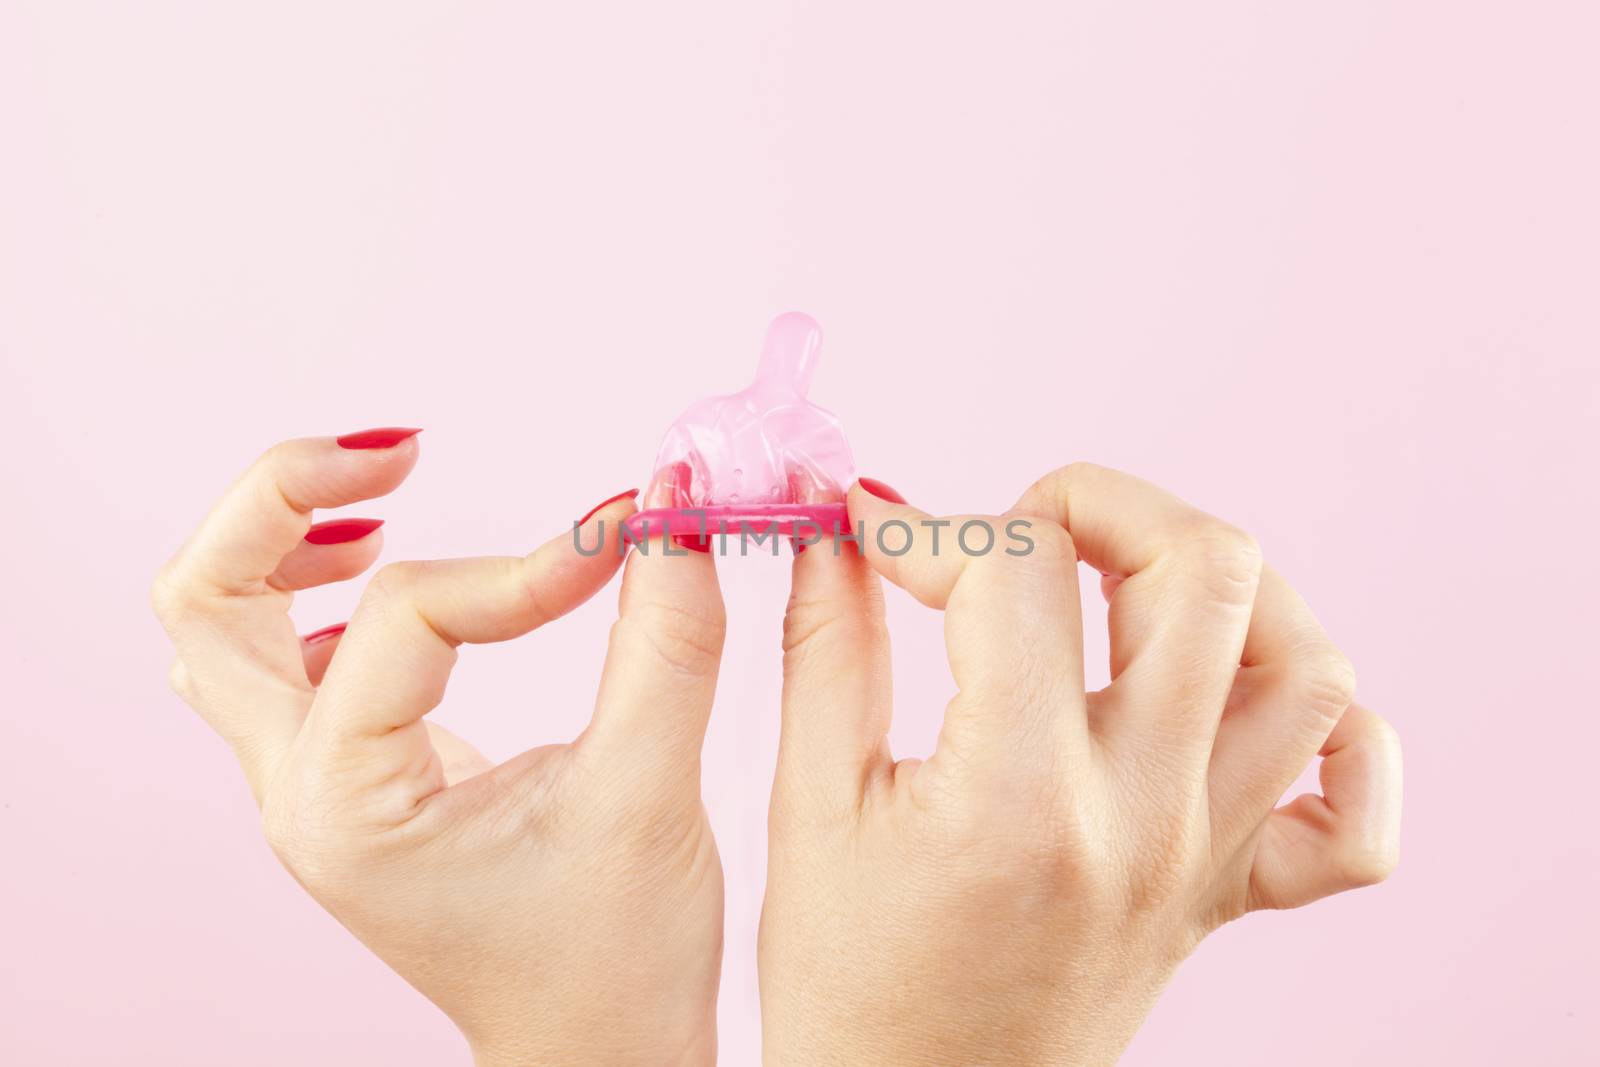 Female hands with red nails holding a pink condom isolated on pink background. Safe sex and birth control concept. 